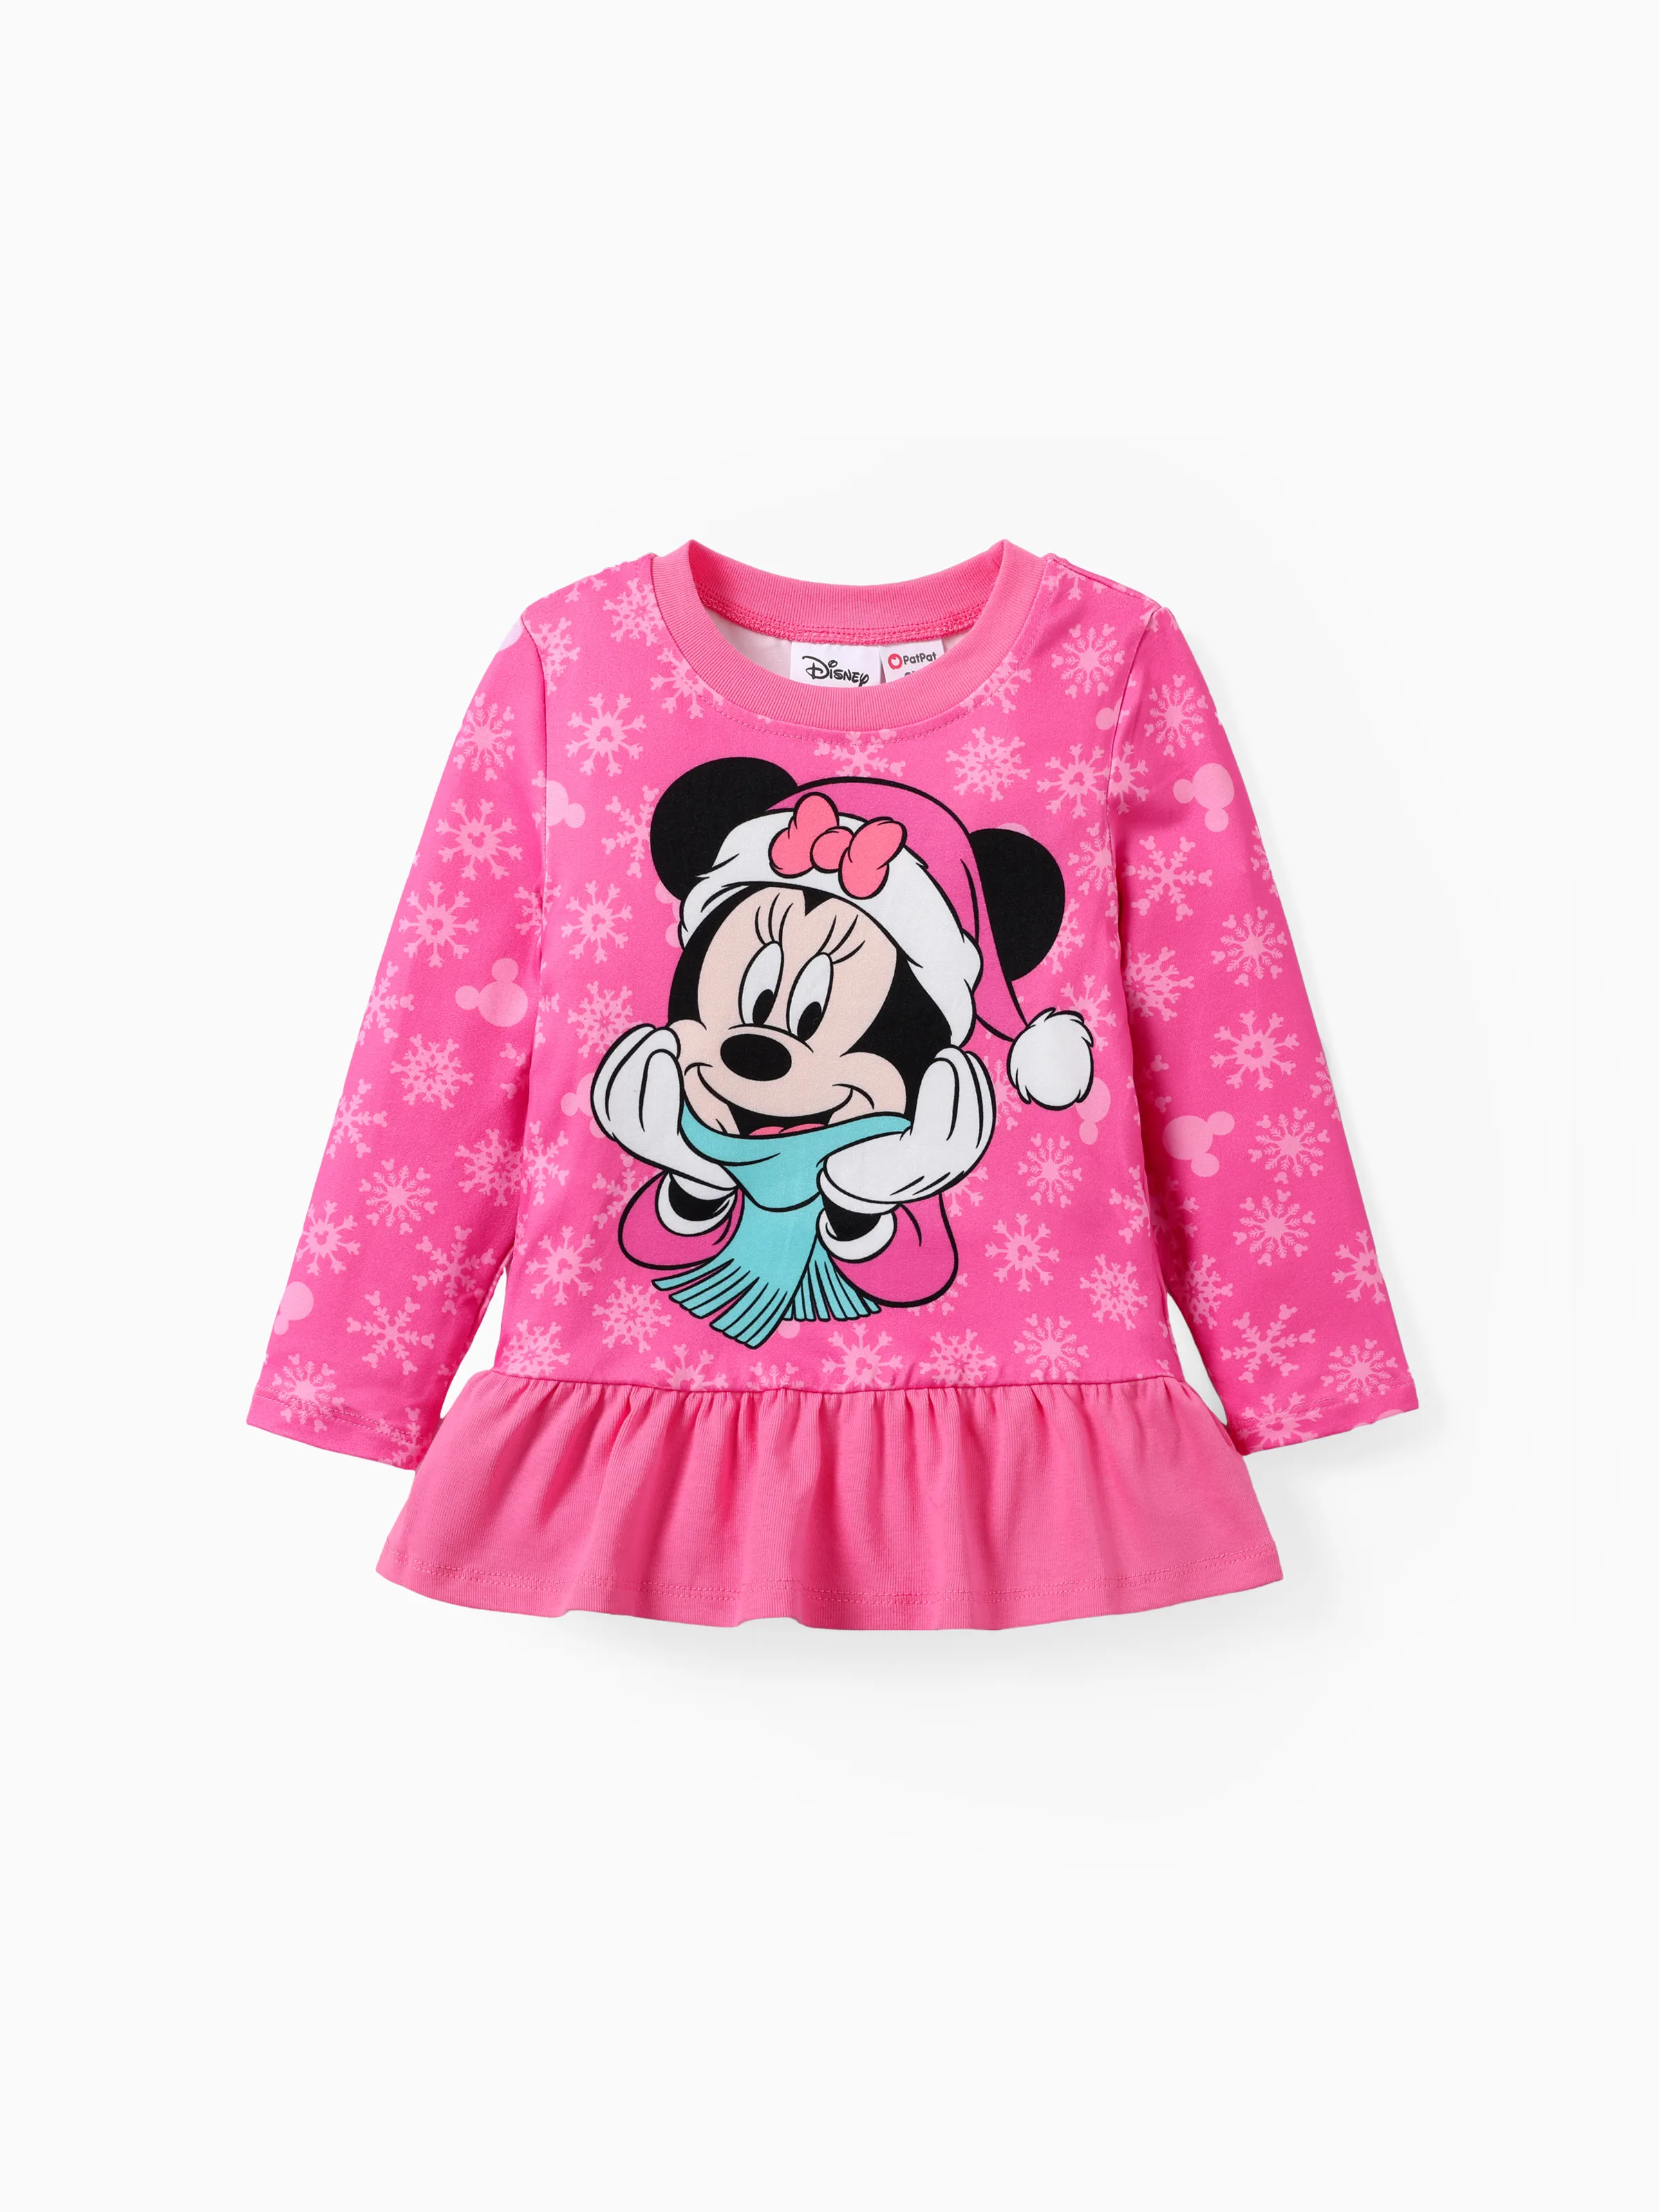 

Disney Mickey and Friends Christmas Toddler Girl Cotton Character Print Top or Colorblock Vest or Leggings